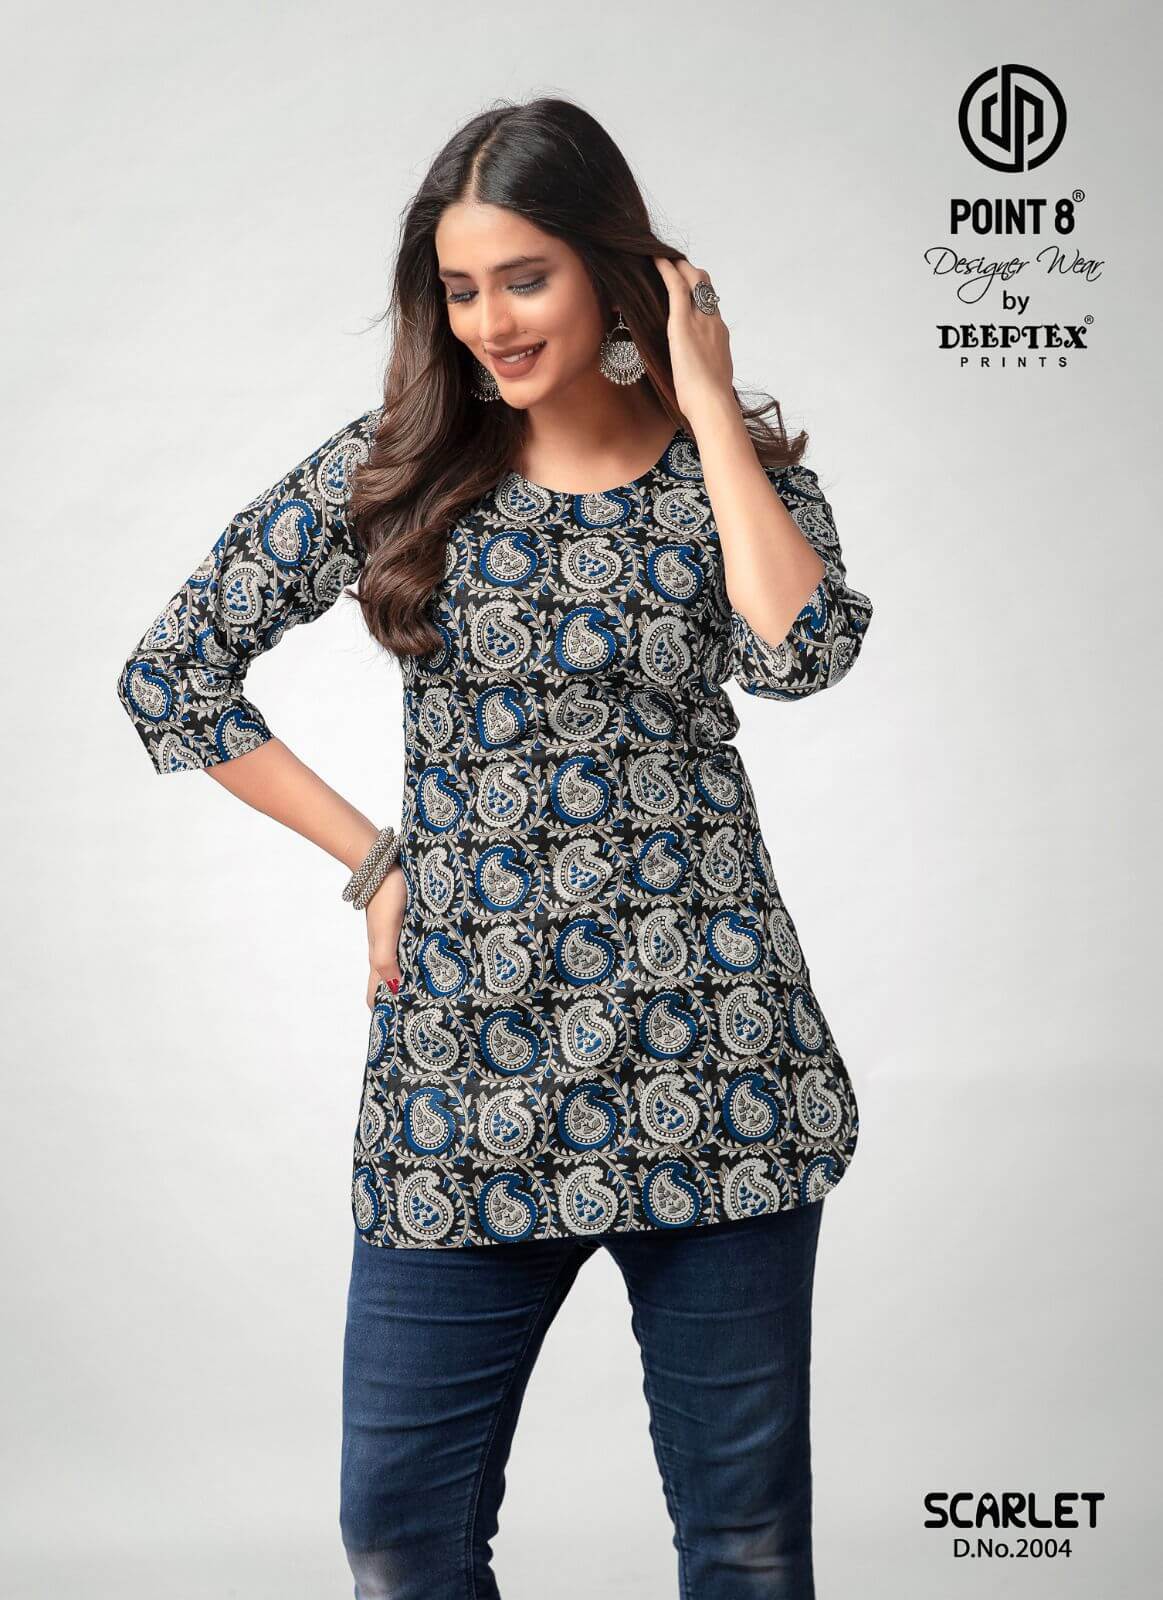 Deeptex Point 8 Scarlet vol 2 Ladies Tops Catalog collection 3